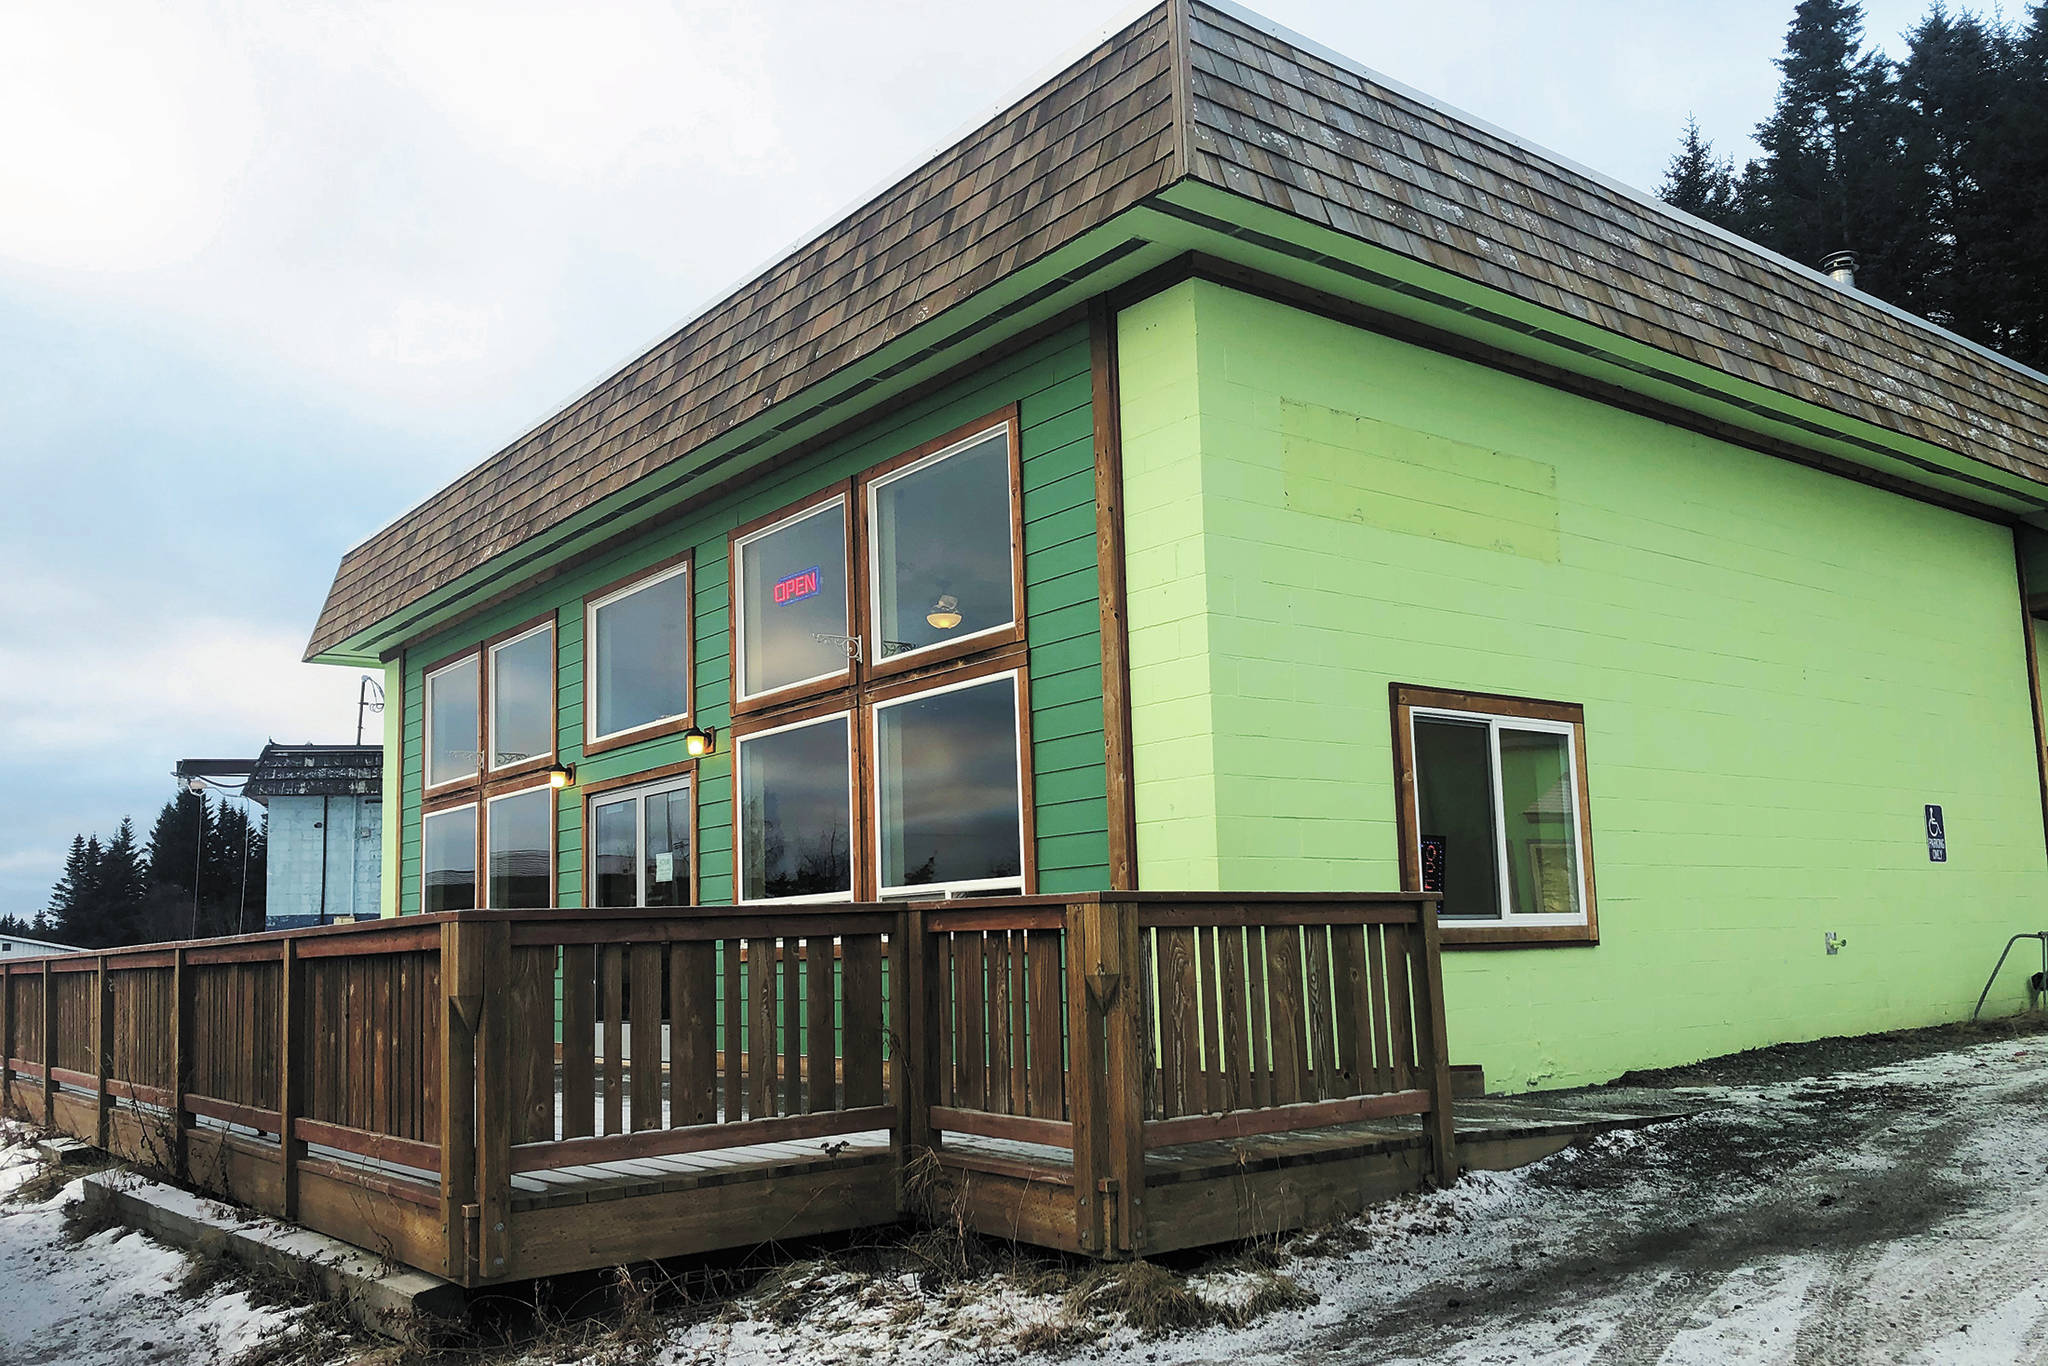 The former K-Bay Caffe building on Pioneer Avenue, seen here Friday, Dec. 18, 2020 in Homer, Alaska, now houses the Coffeesmith Cafe. (Photo by Megan Pacer/Homer News)